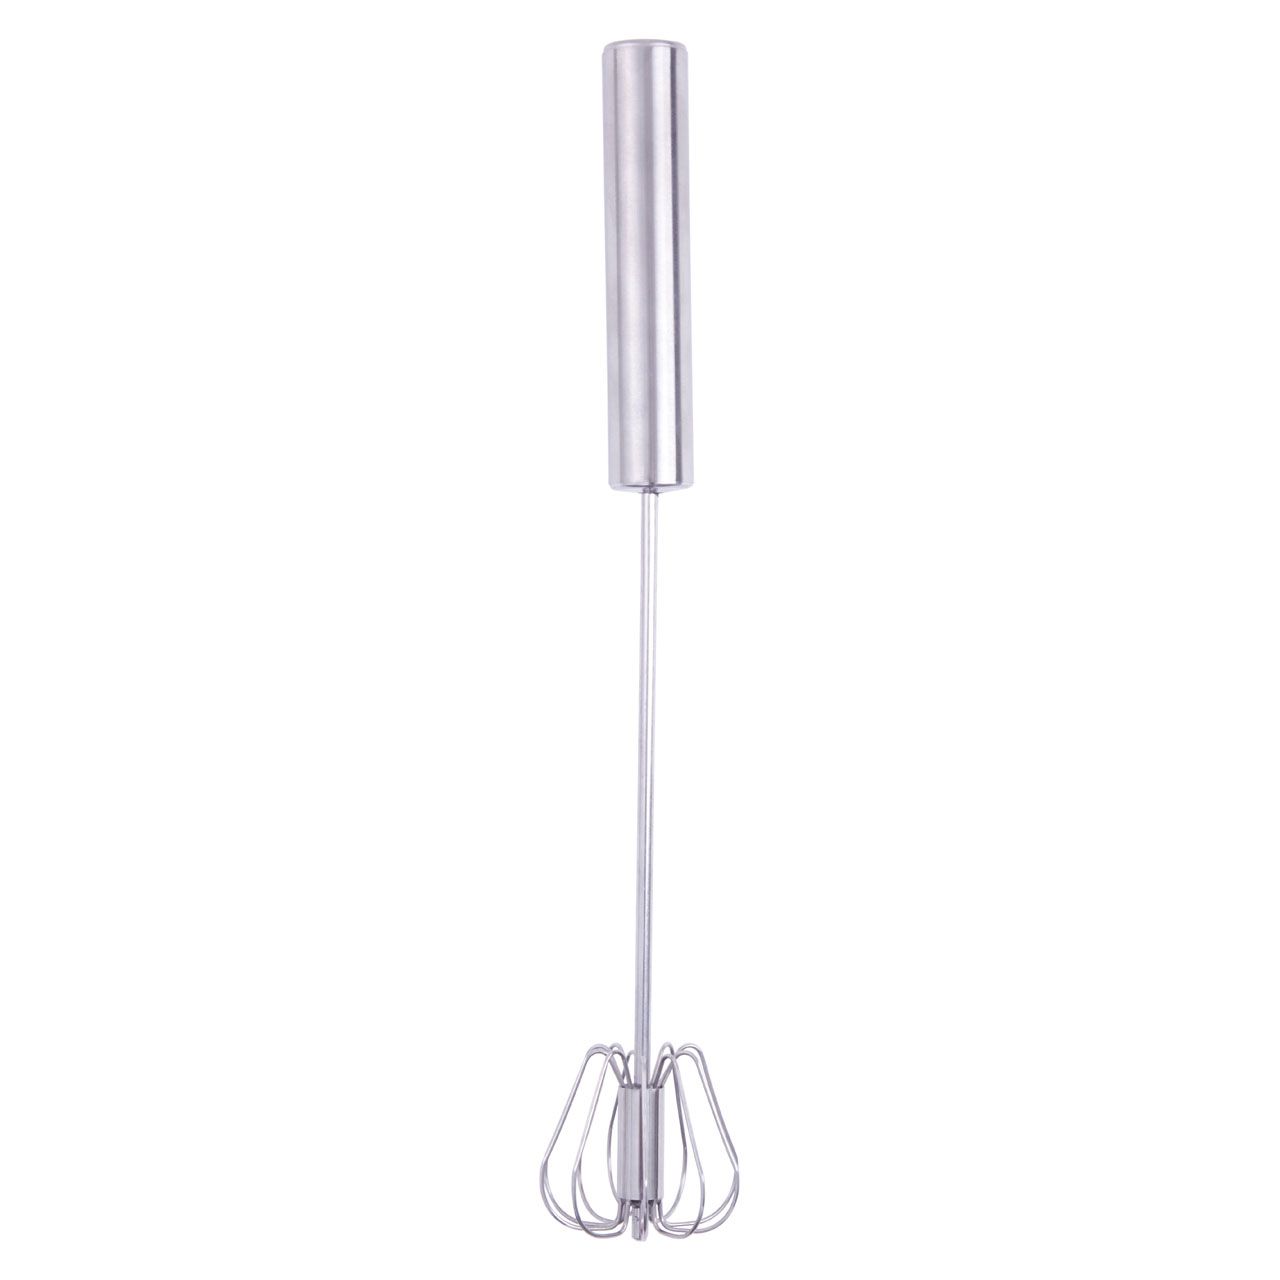 Matte Finish Stainless Steel Press and Spin Kitchen Gadget Whisk